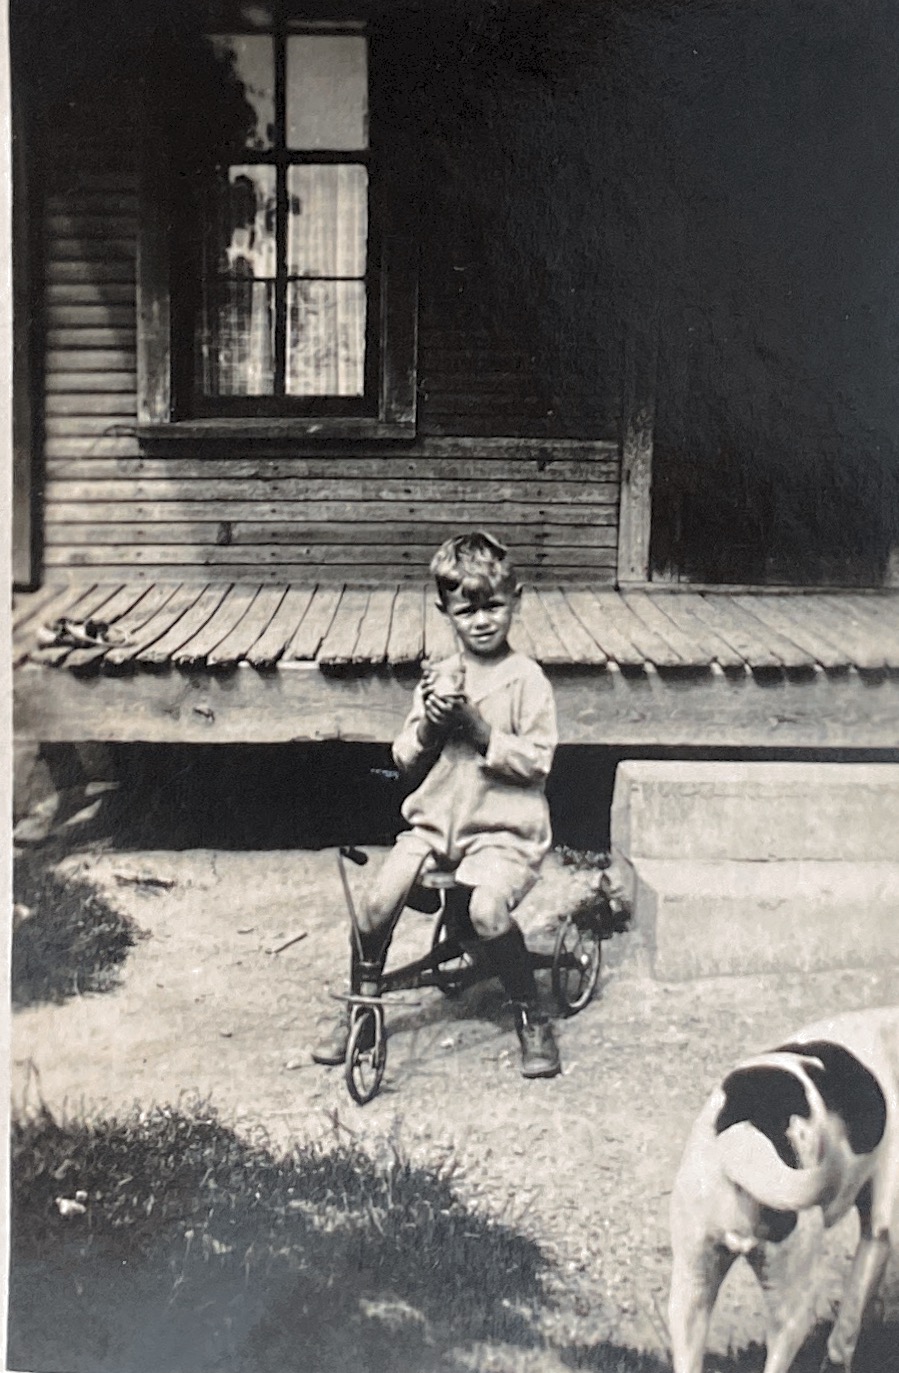 James and his dog. Taken in Indiana August 1925